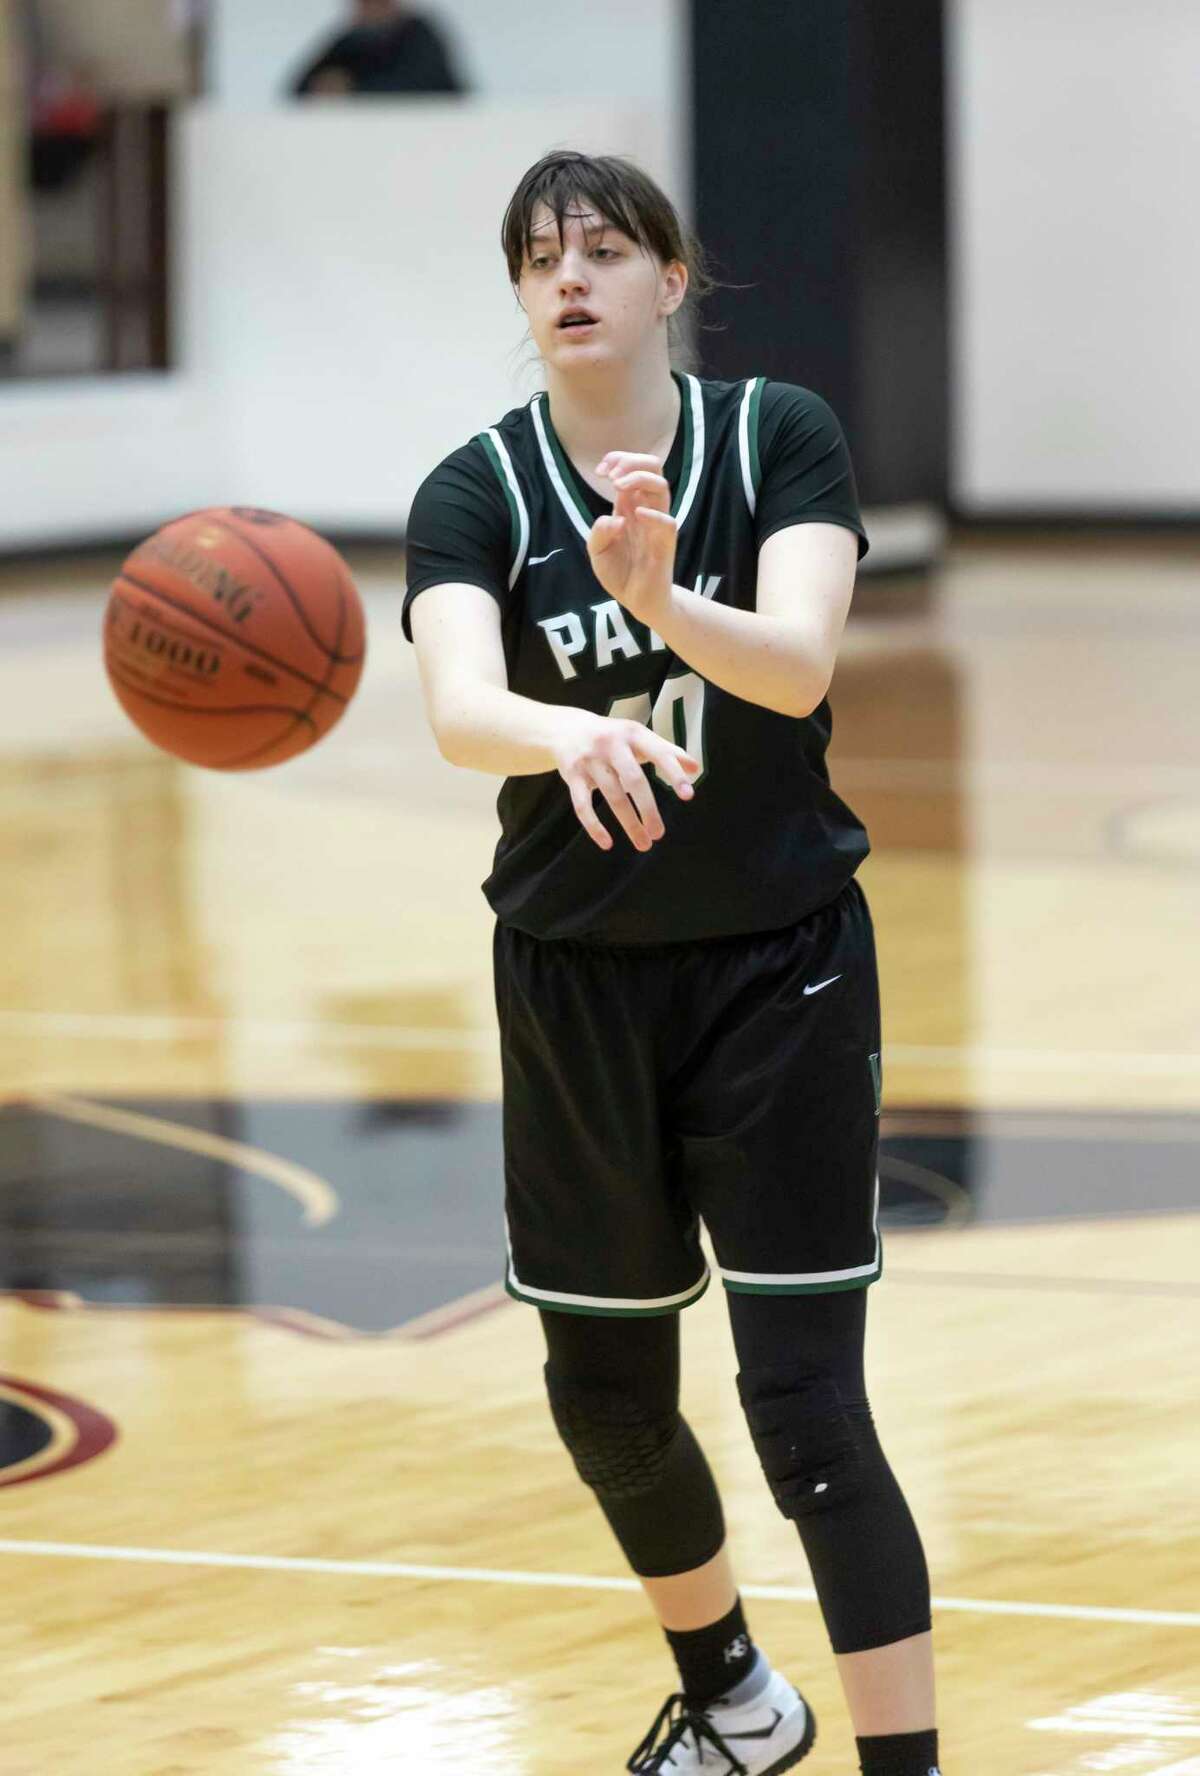 Kingwood Park guard Melina Merritt (10) passes the ball during the second quarter of a District 20-5A girls basketball game against Porter at Porter High School, Saturday, Feb. 6, 2021 in Porter.